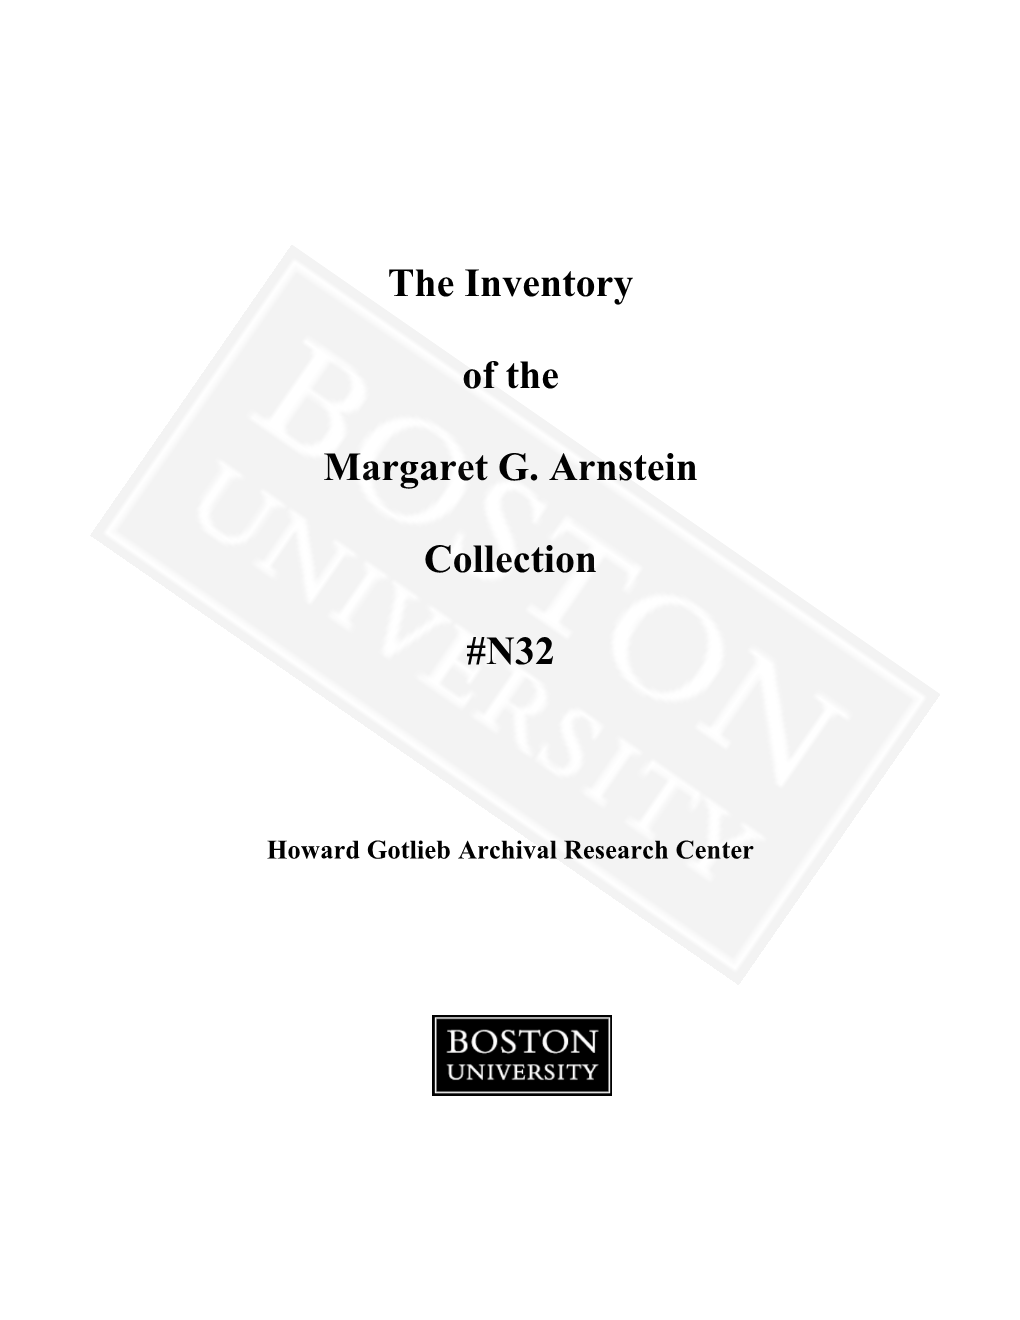 The Inventory of the Margaret G. Arnstein Collection #N32